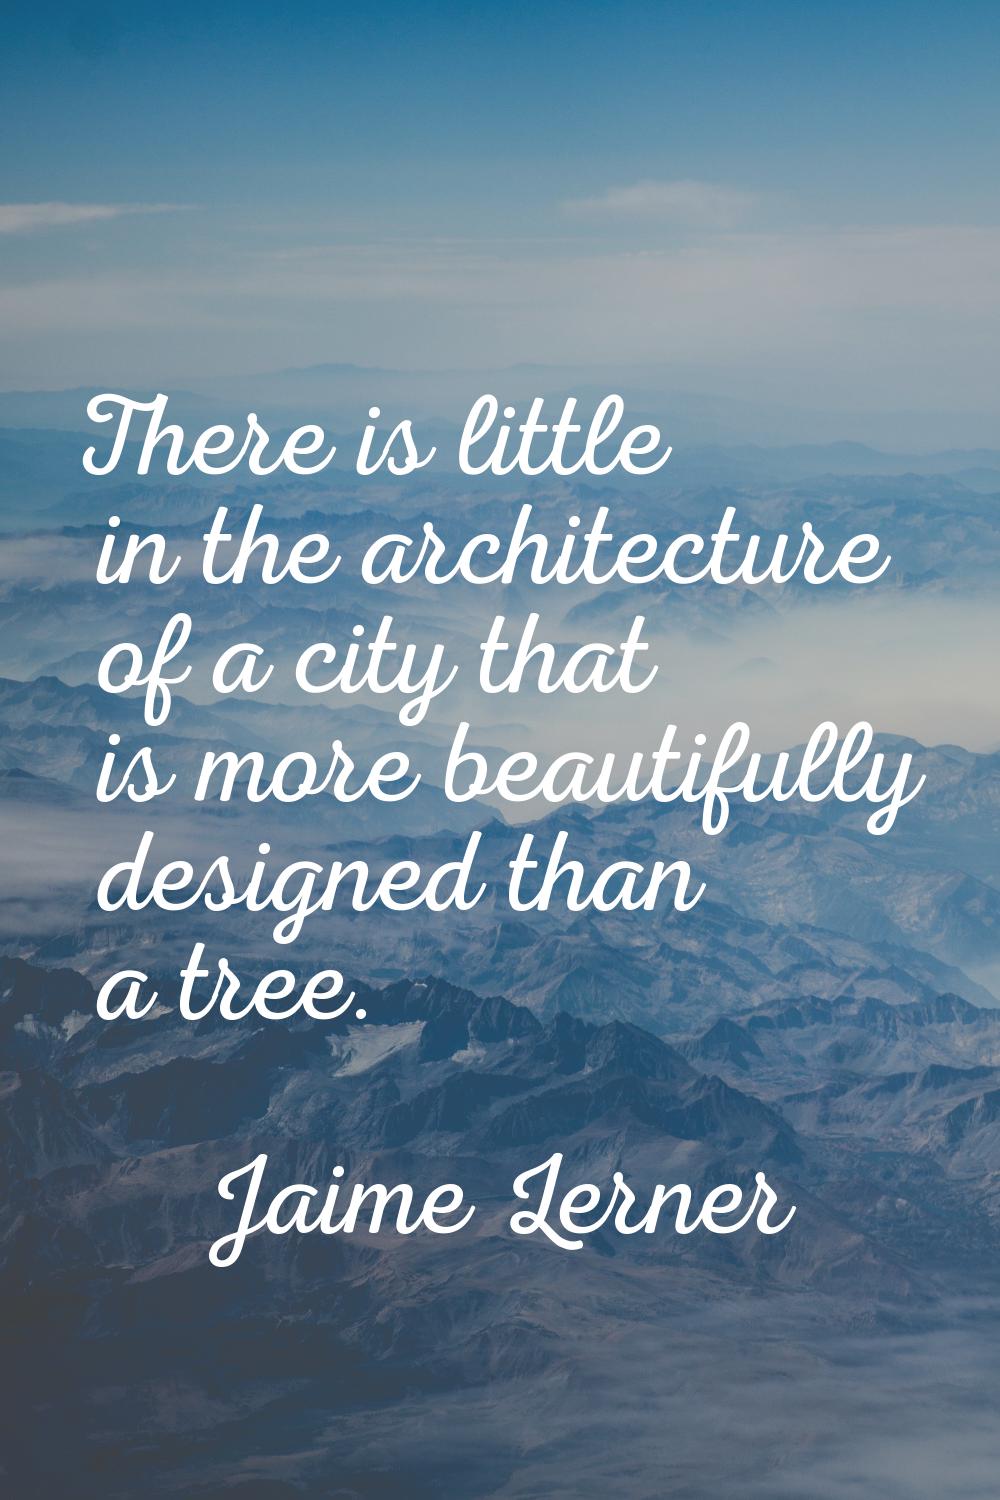 There is little in the architecture of a city that is more beautifully designed than a tree.